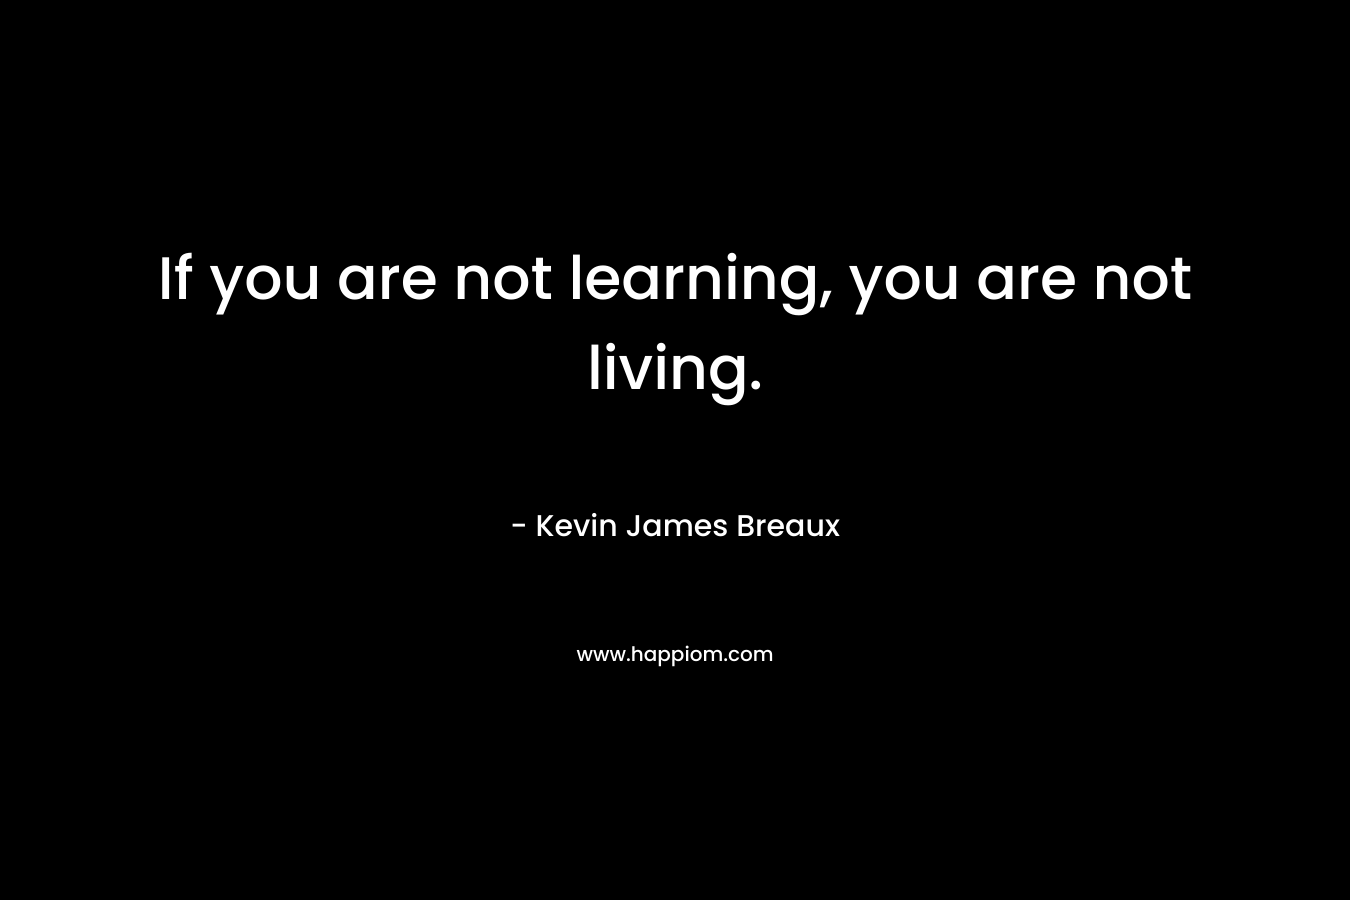 If you are not learning, you are not living.